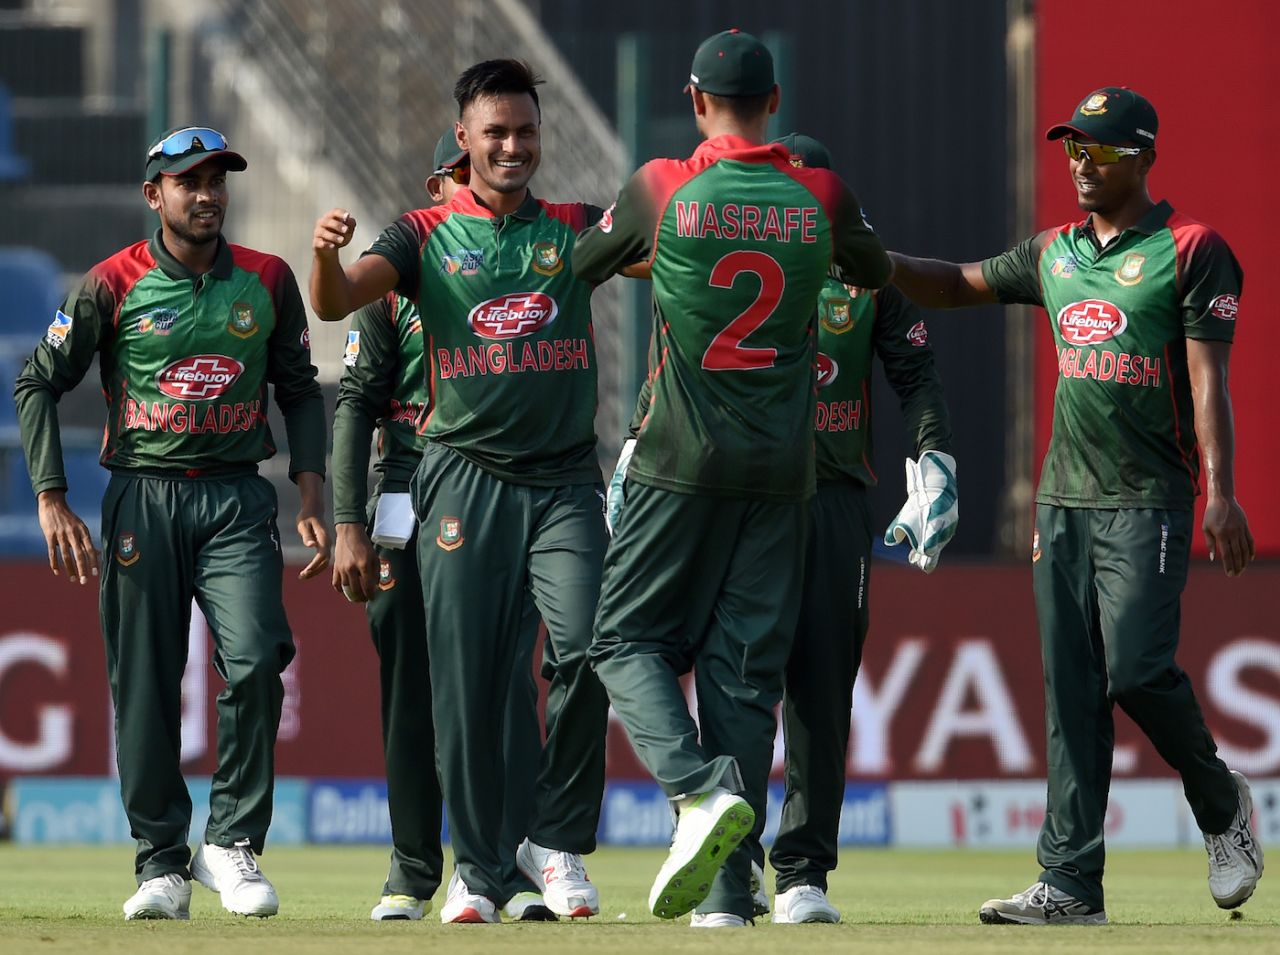 Abu Hider is congratulated after his early strikes, Afghanistan v Bangladesh, Group B, Asia Cup 2018, Abu Dhabi, September 20, 2018